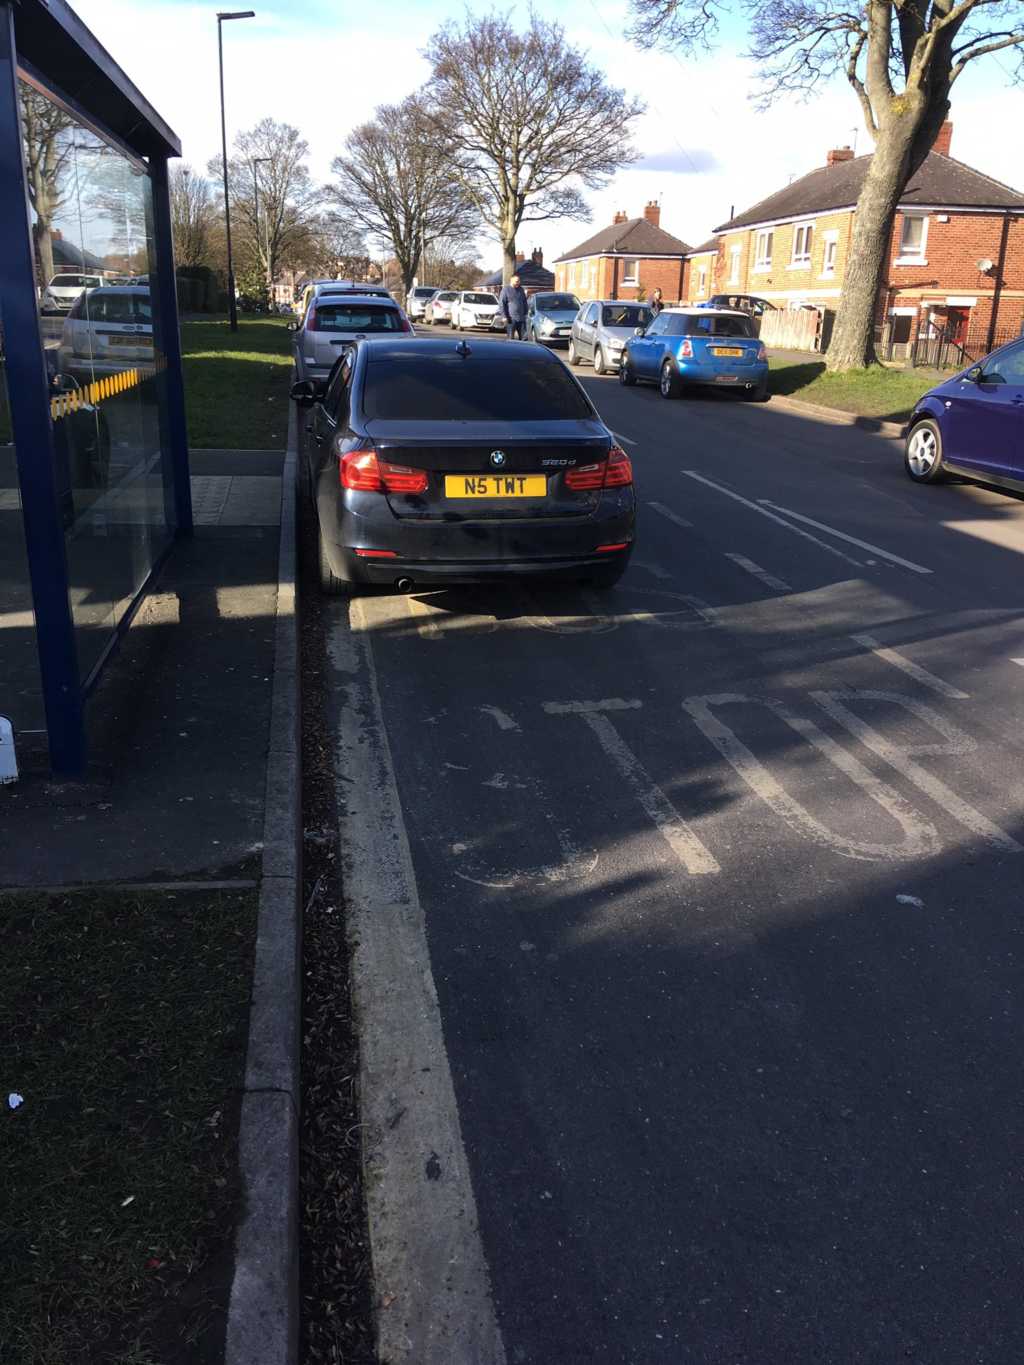 N5 TWT displaying Inconsiderate Parking